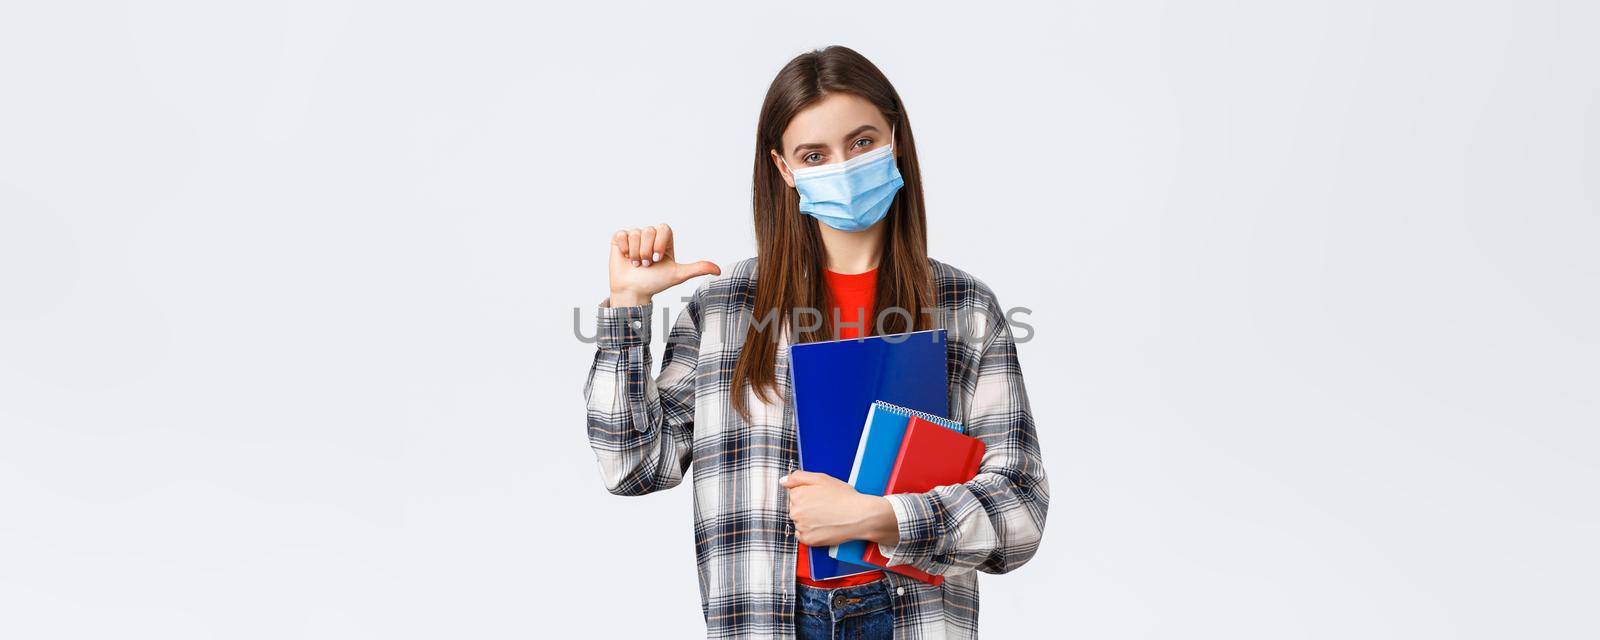 Coronavirus pandemic, covid-19 education, and back to school concept. Confident sassy female student pointing herself, wear medical mask, studying at university, holding notebooks.